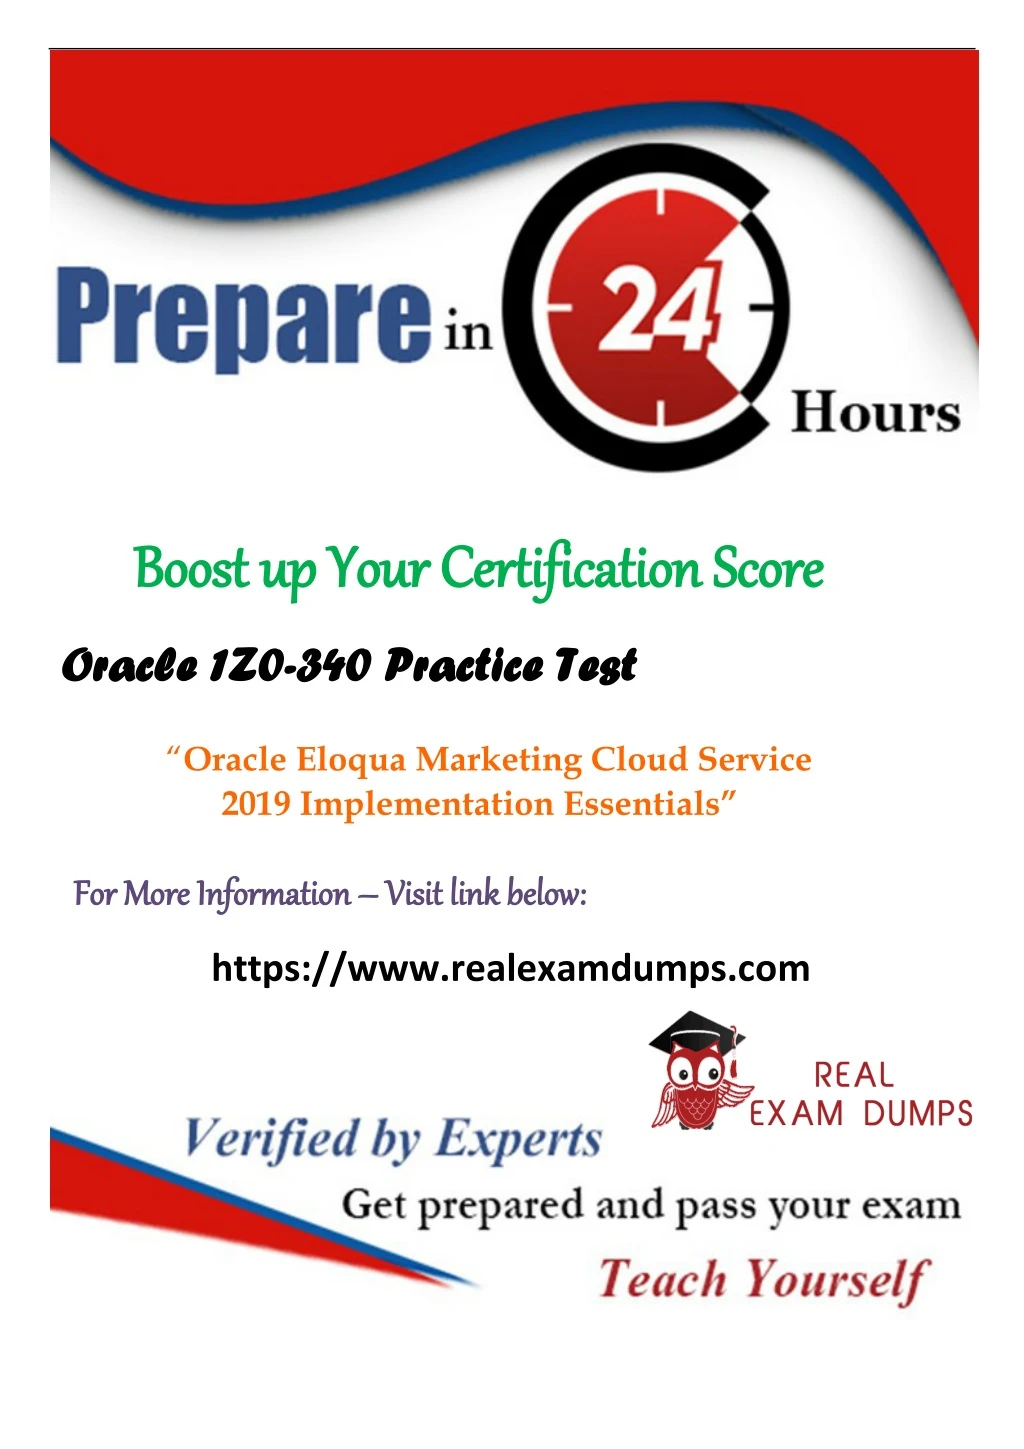 boost up your certification score boost up your